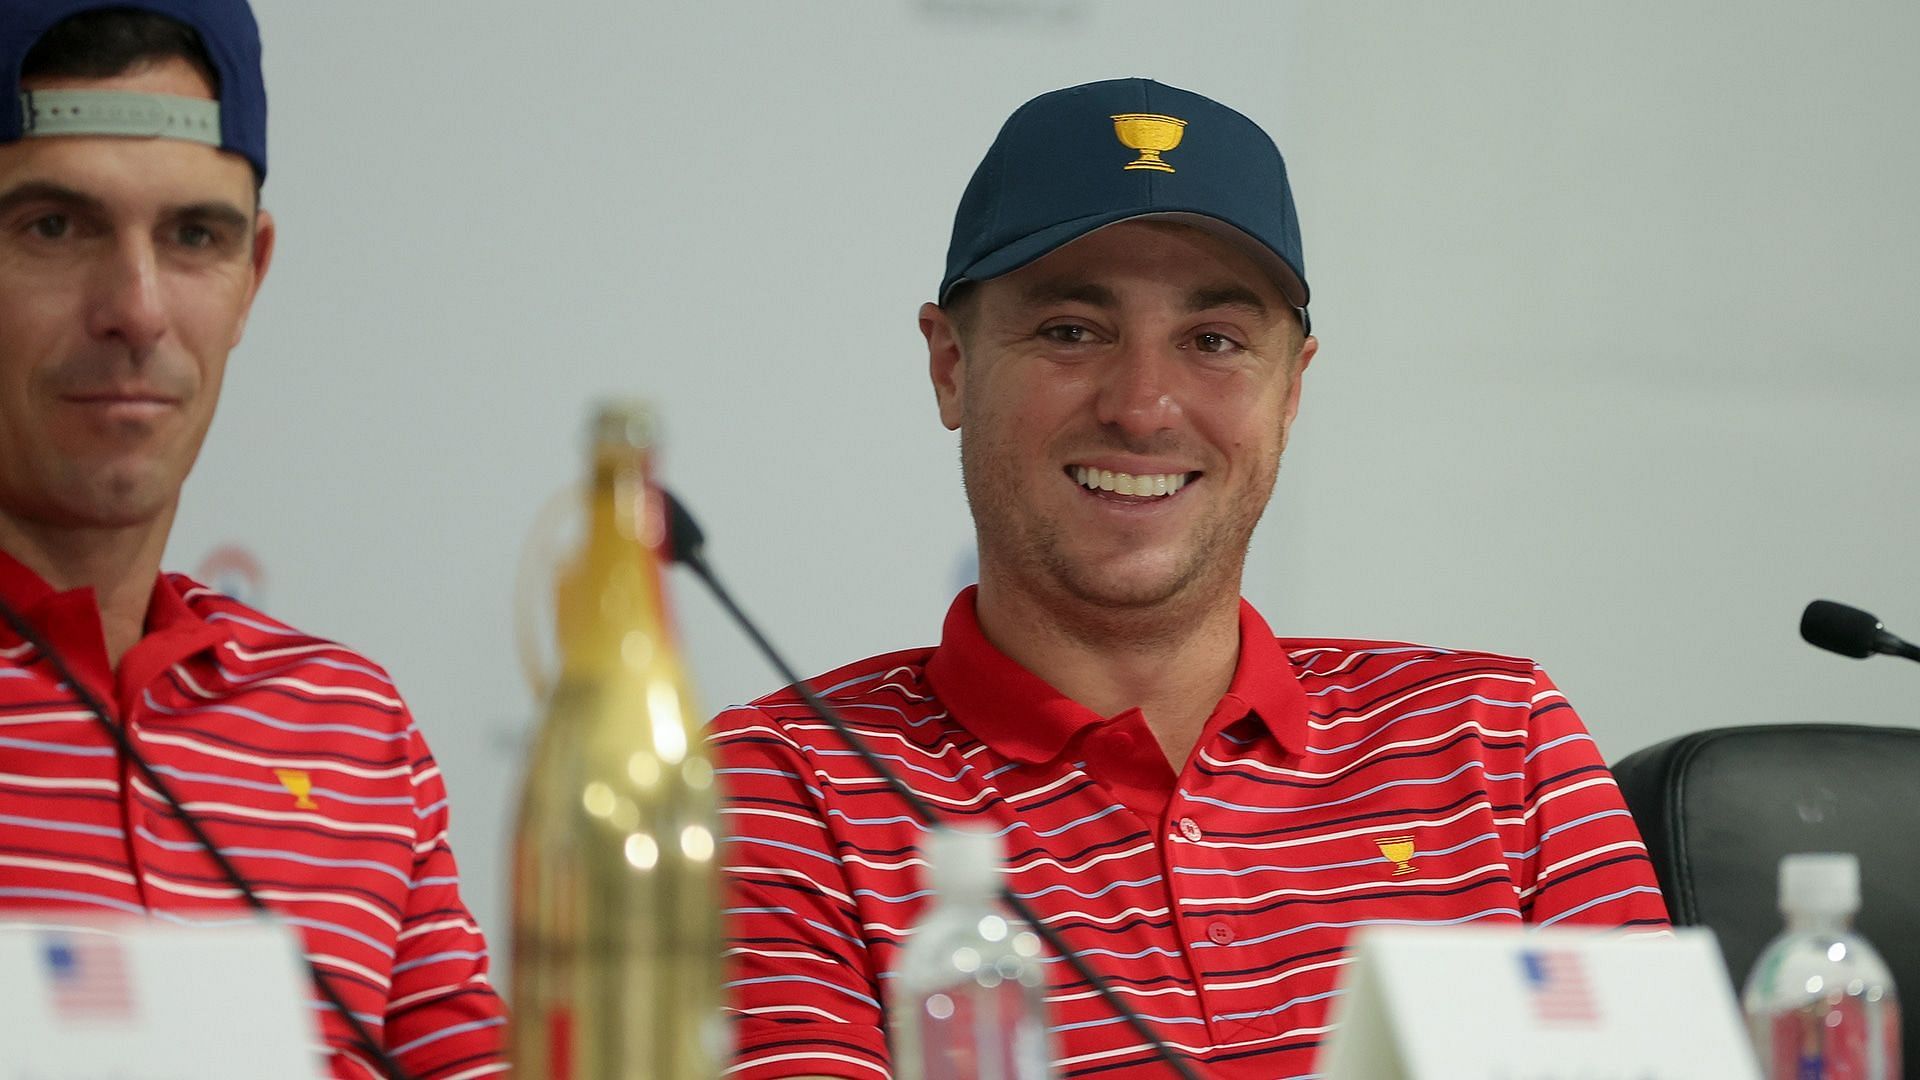 "This nightmare made me laugh” Justin Thomas dreams of Colt Knost